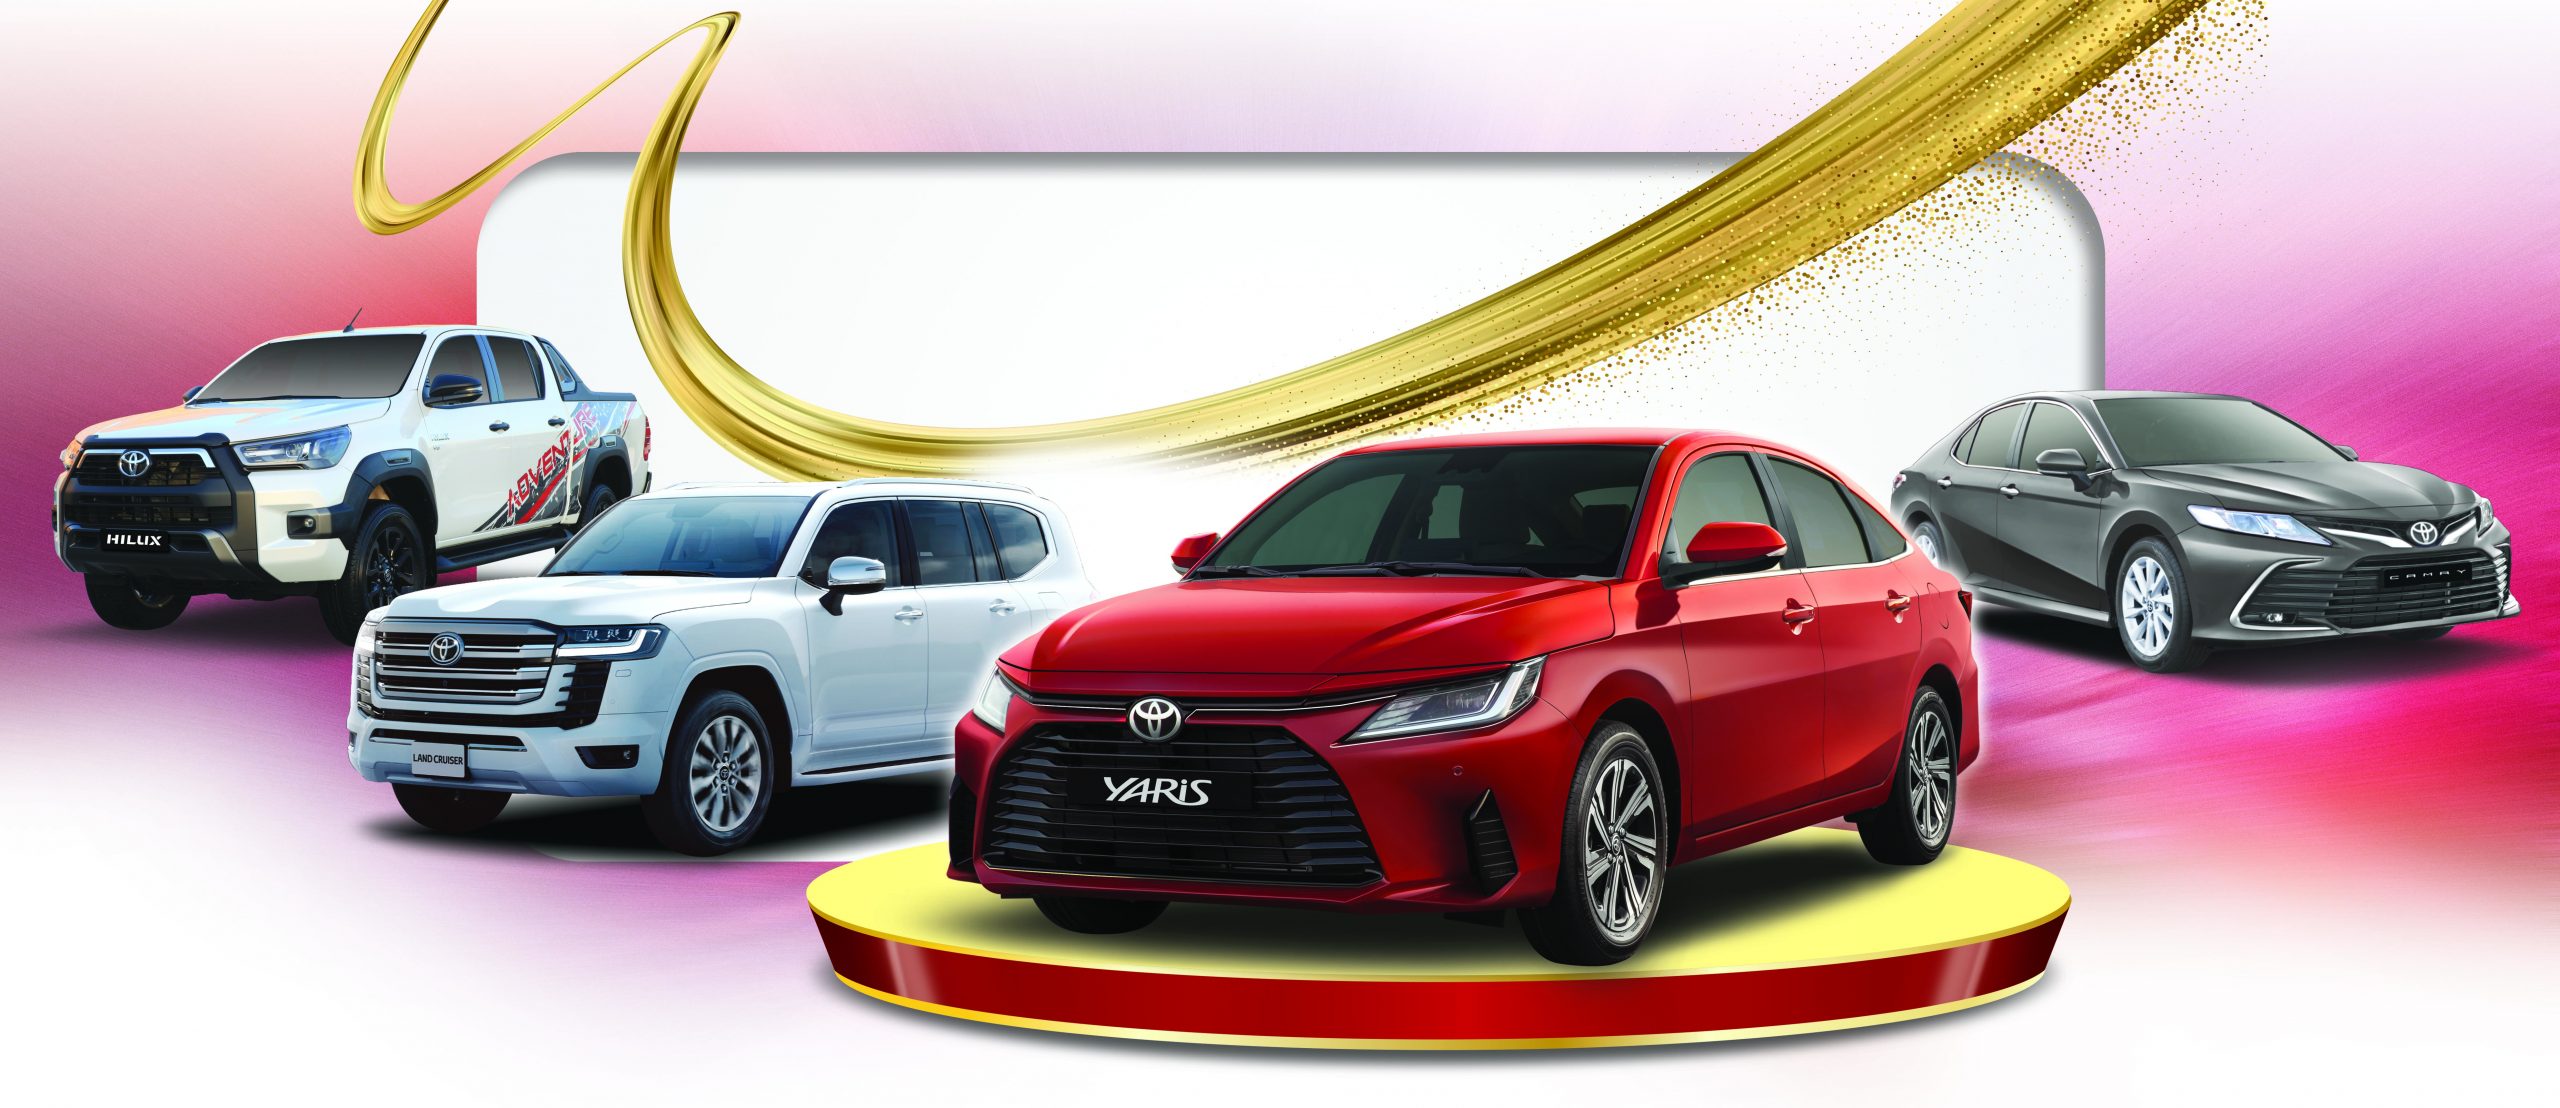 Toyota Popular ‘Toyota Oubess’ Campaign Ending Soon